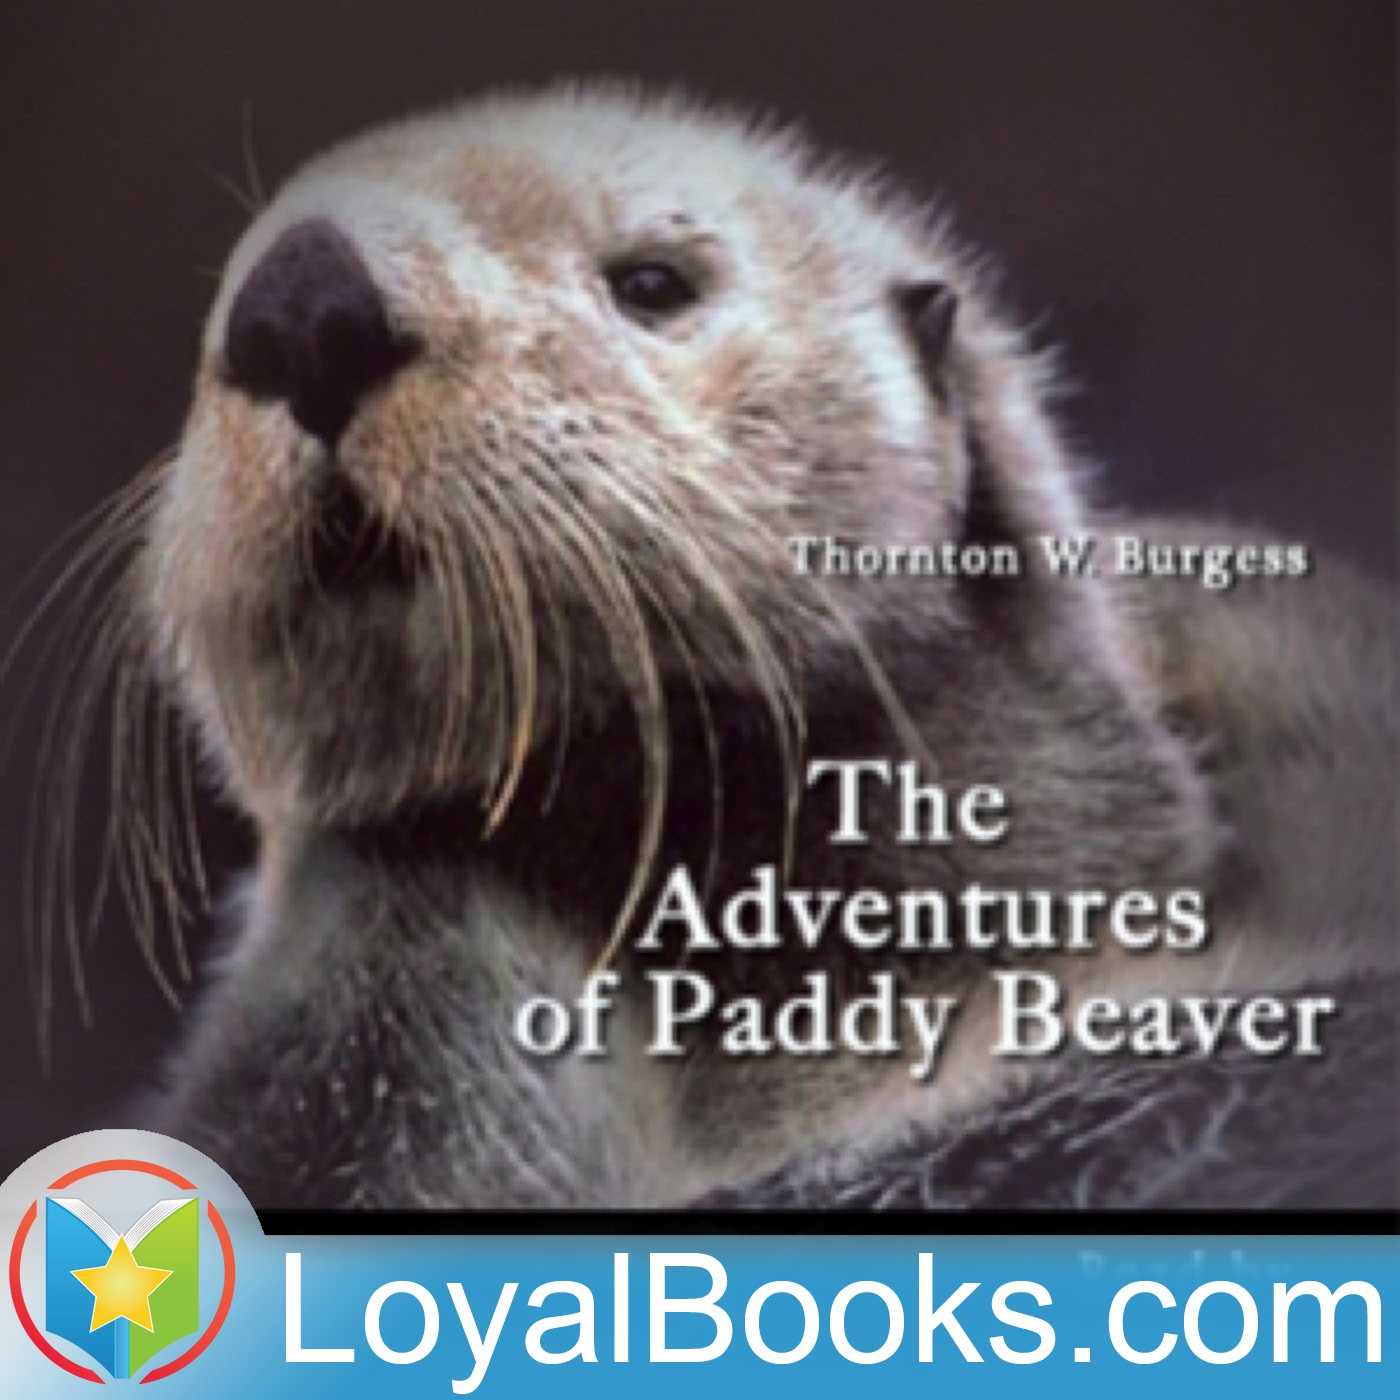 The Adventures of Paddy Beaver by Thornton W. Burgess